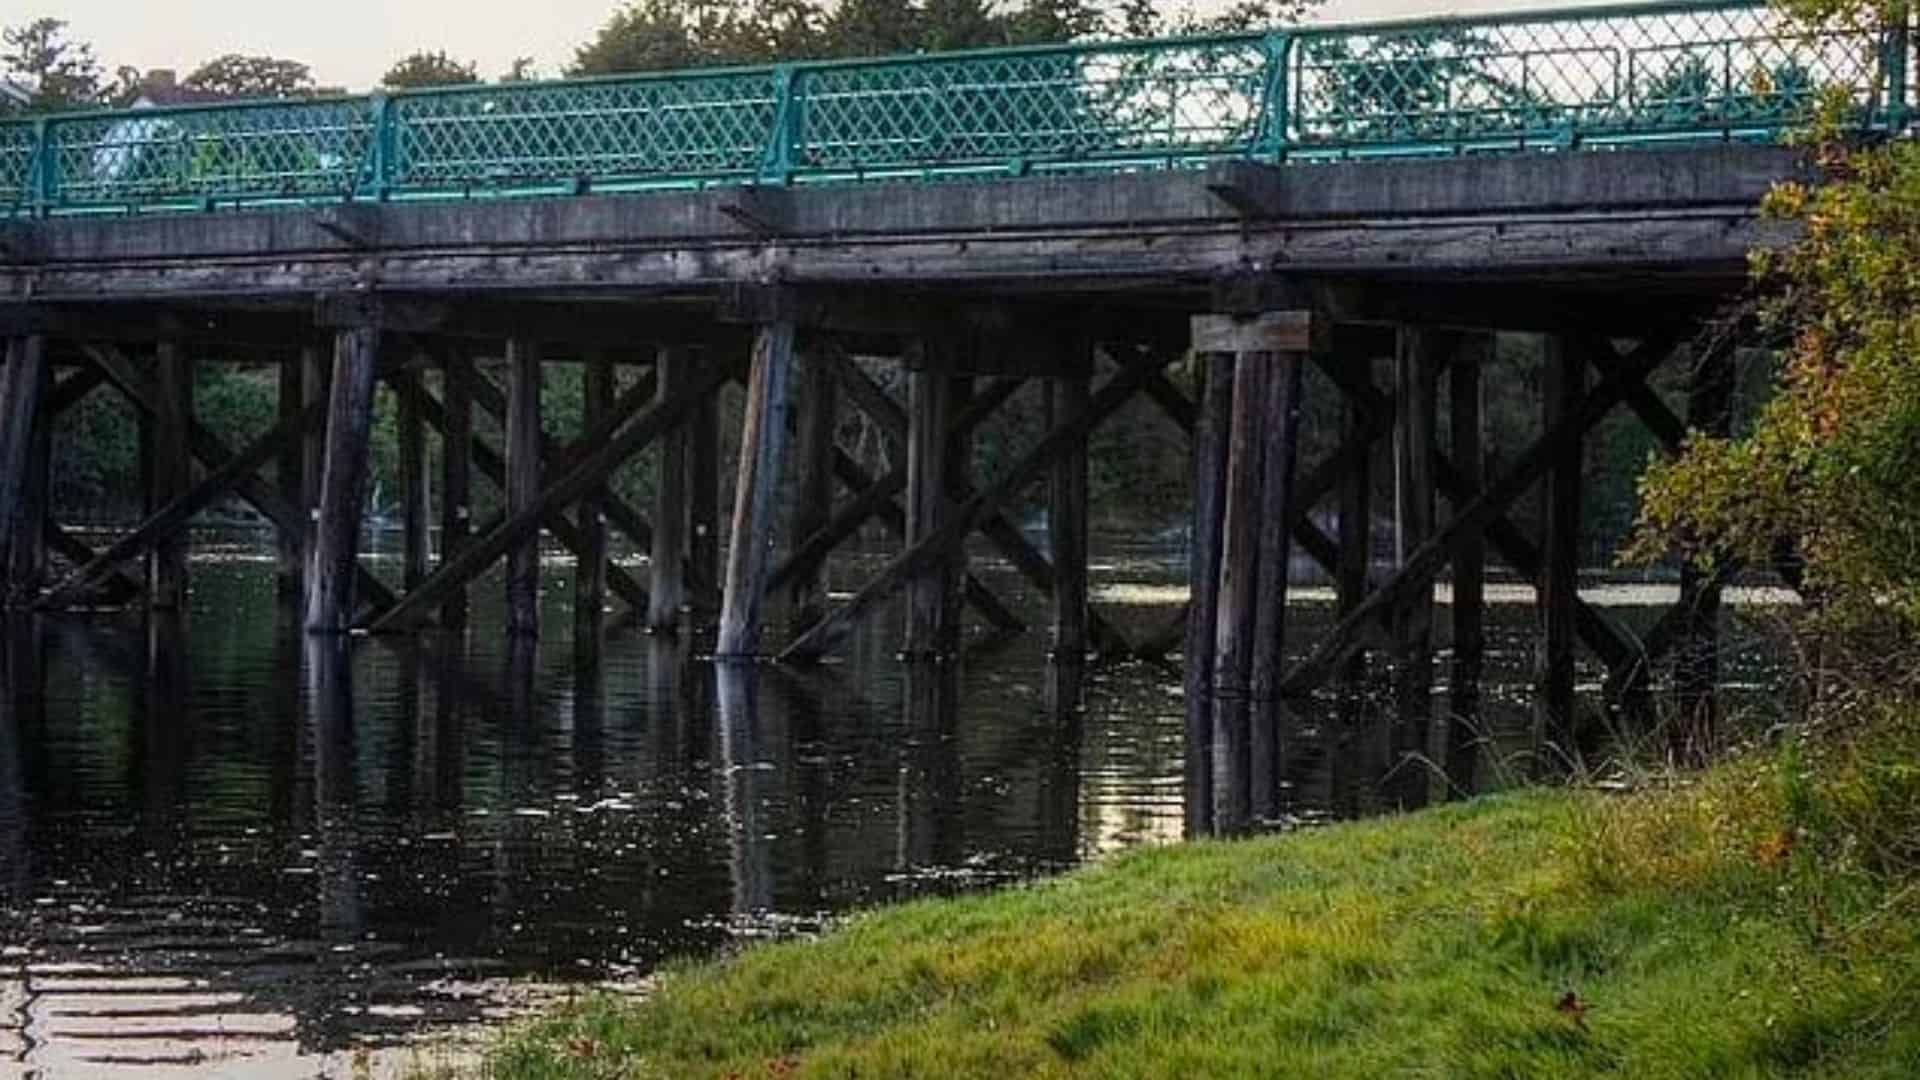 Bridge in Saanich, British Columbia in this image from Daily Mail.